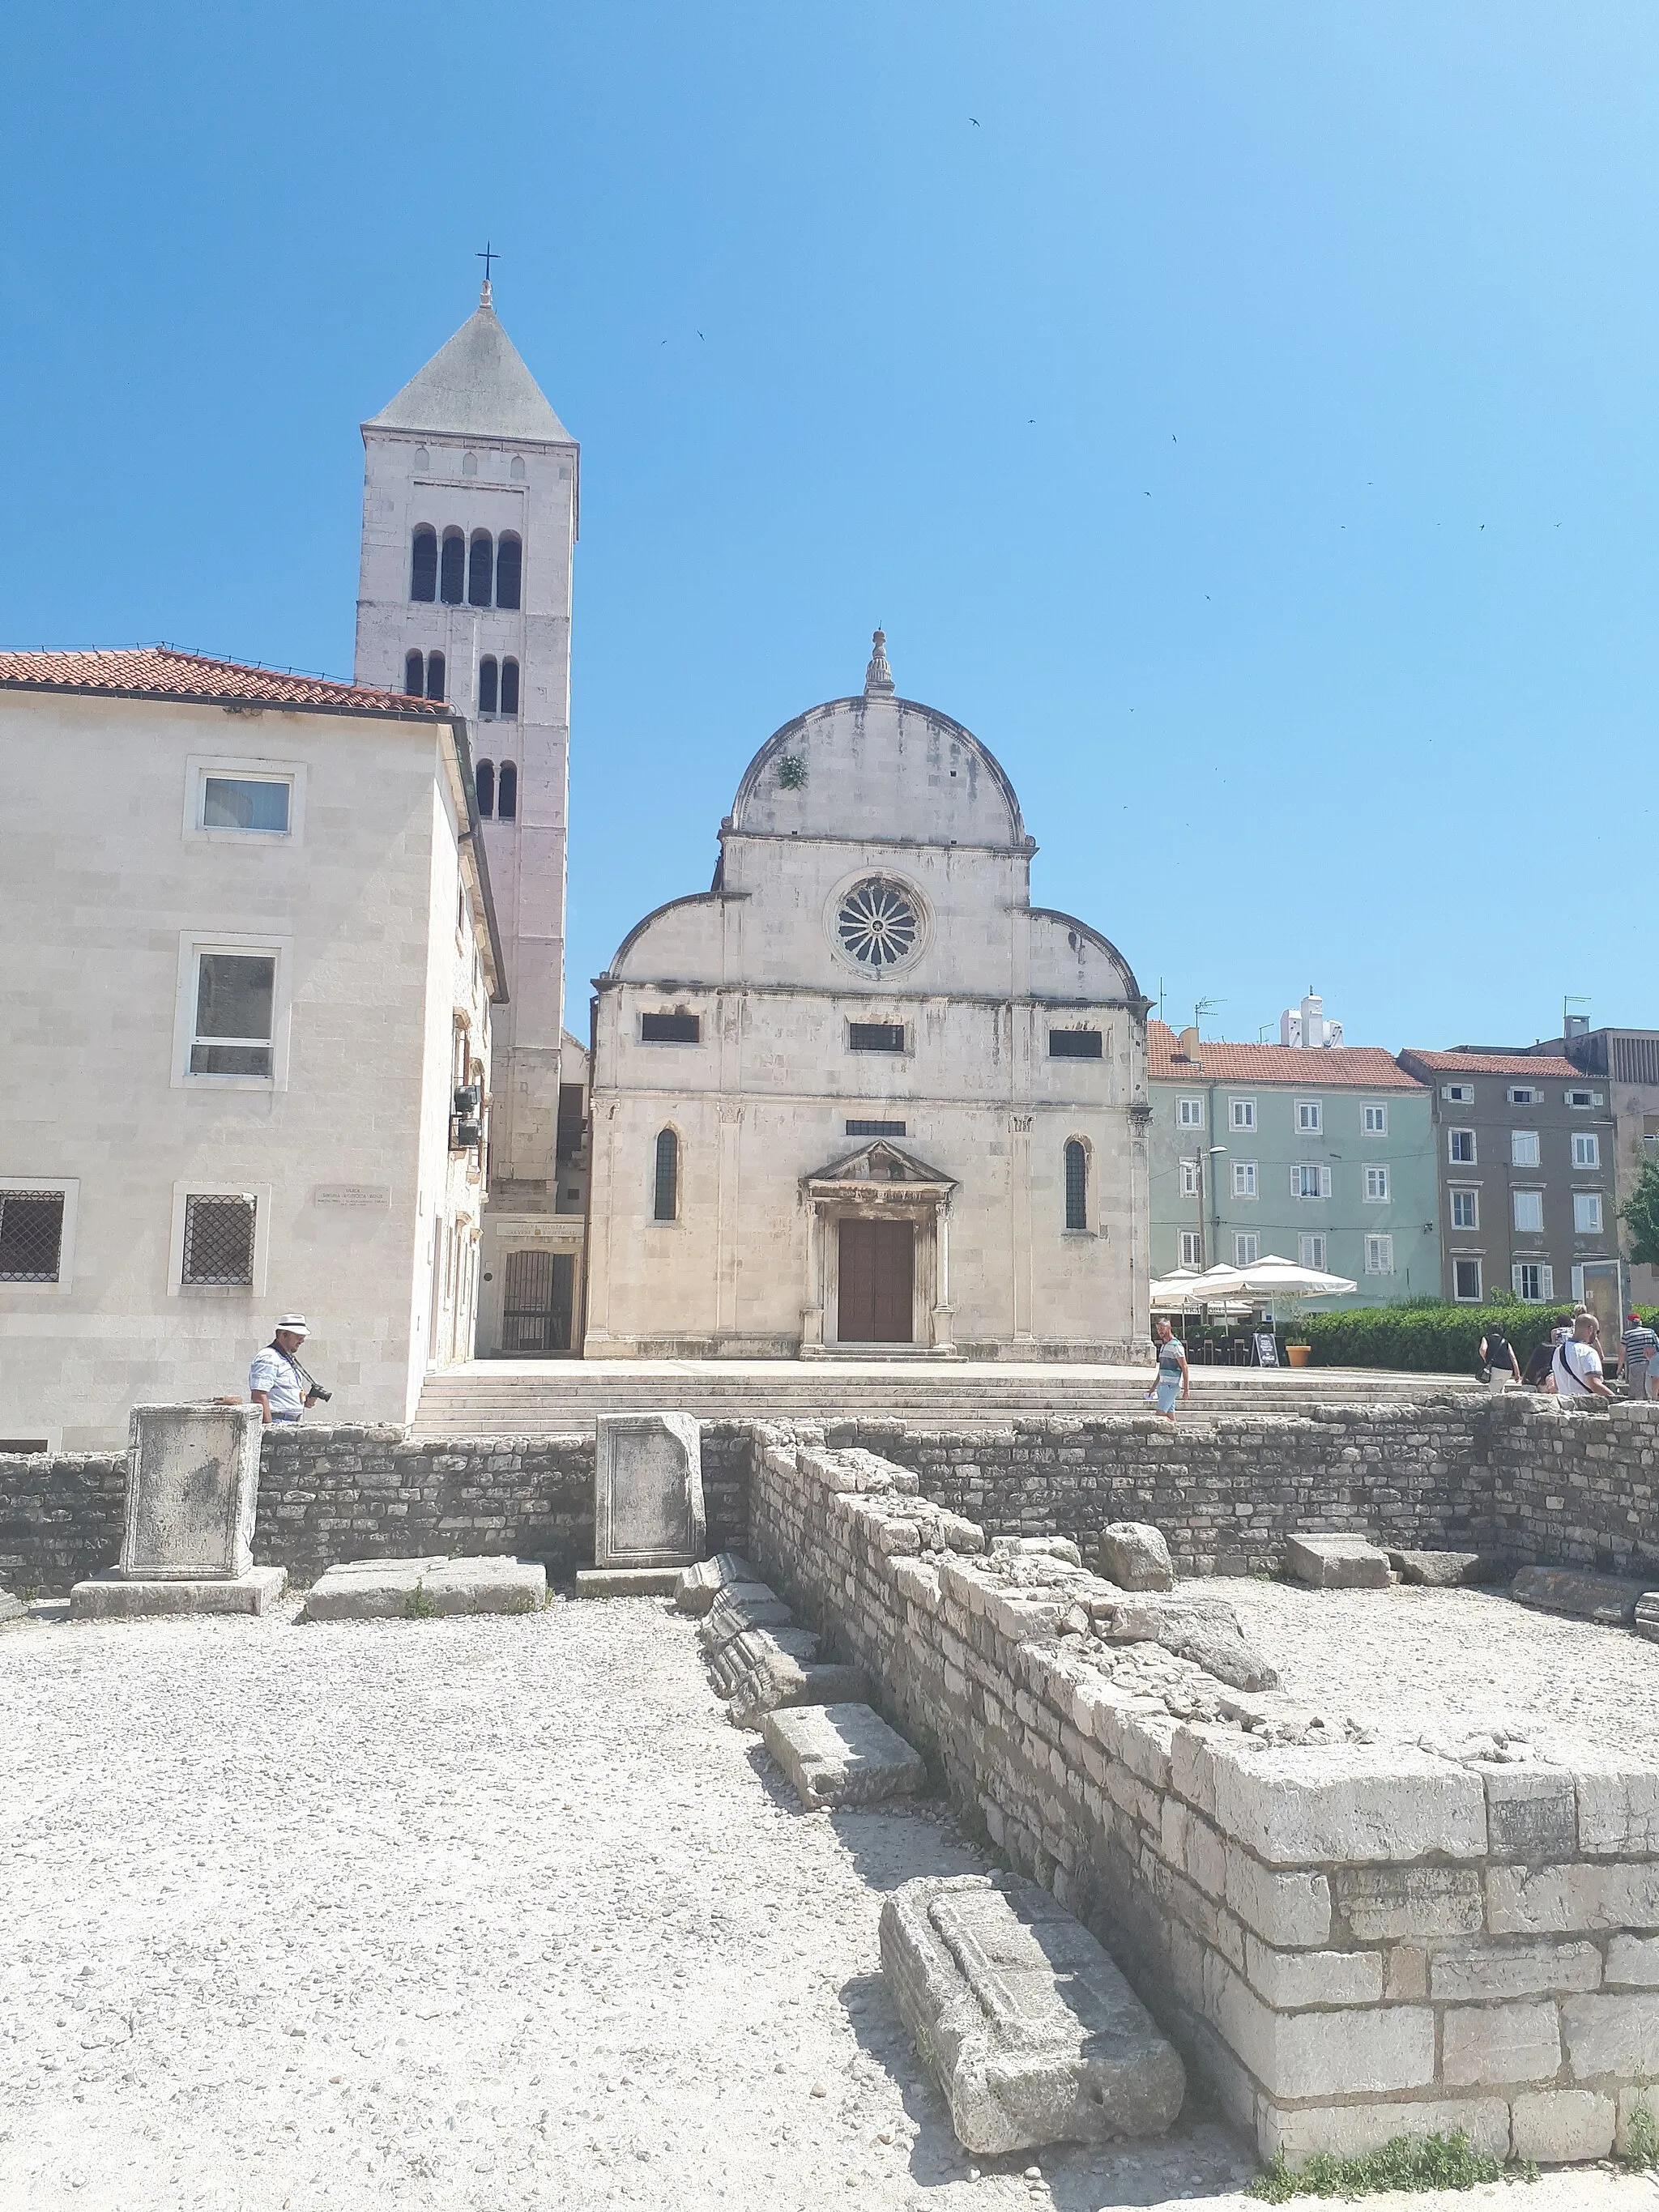 Photo showing: Church of St. Mary is a benedictine monastery located in Zadar, Croatia. It was founded in 1066 on the eastern side of the old Roman forum.